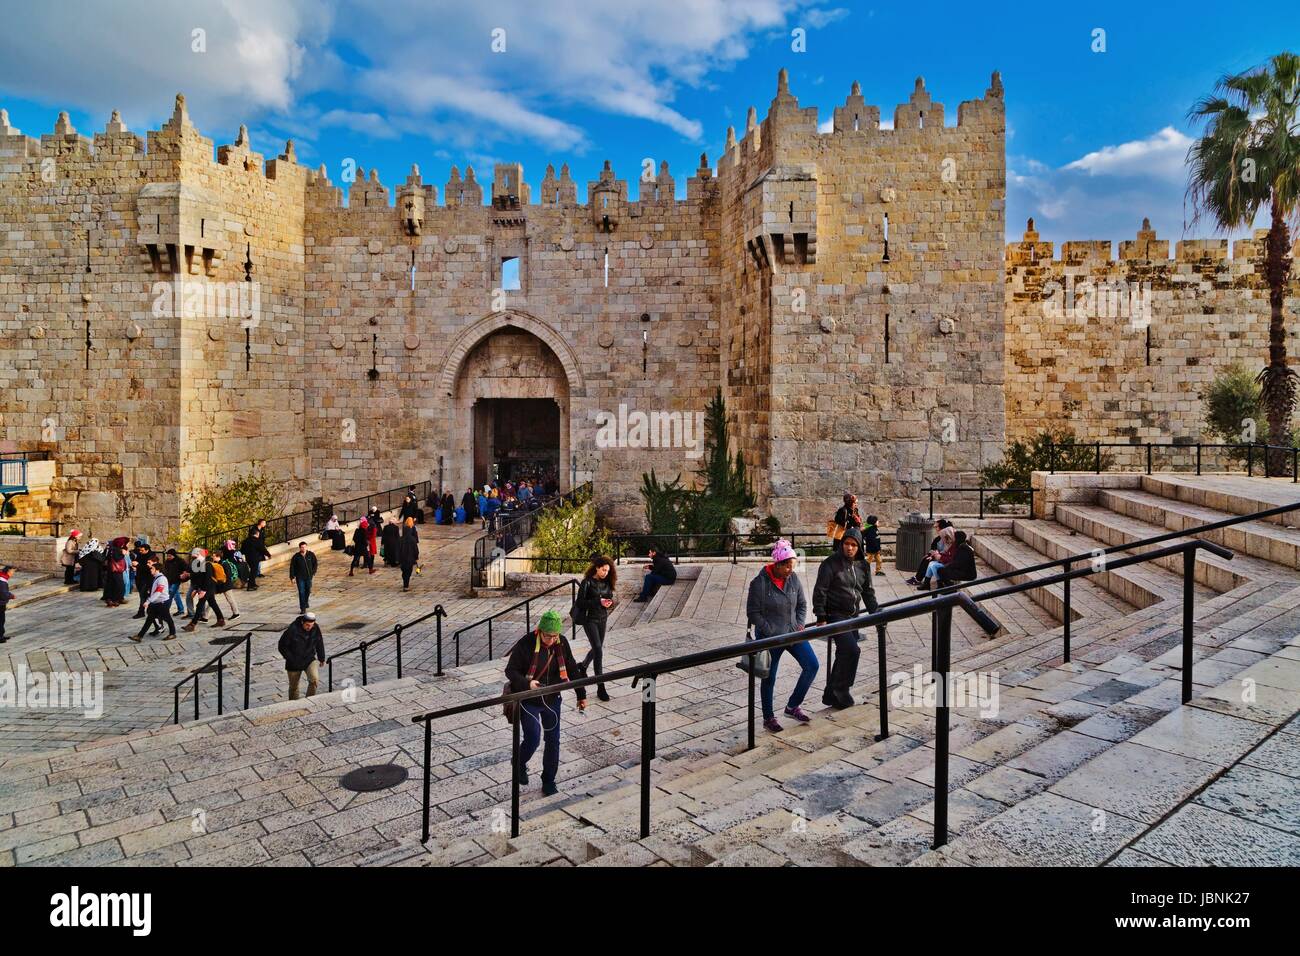 JERUSALEM, ISRAEL - DECEMBER 29, 2016: Damascus gate, nord entrance in old part of Jerusalem. Gate was built in 1537 by Suleiman the Magnificent with  Stock Photo